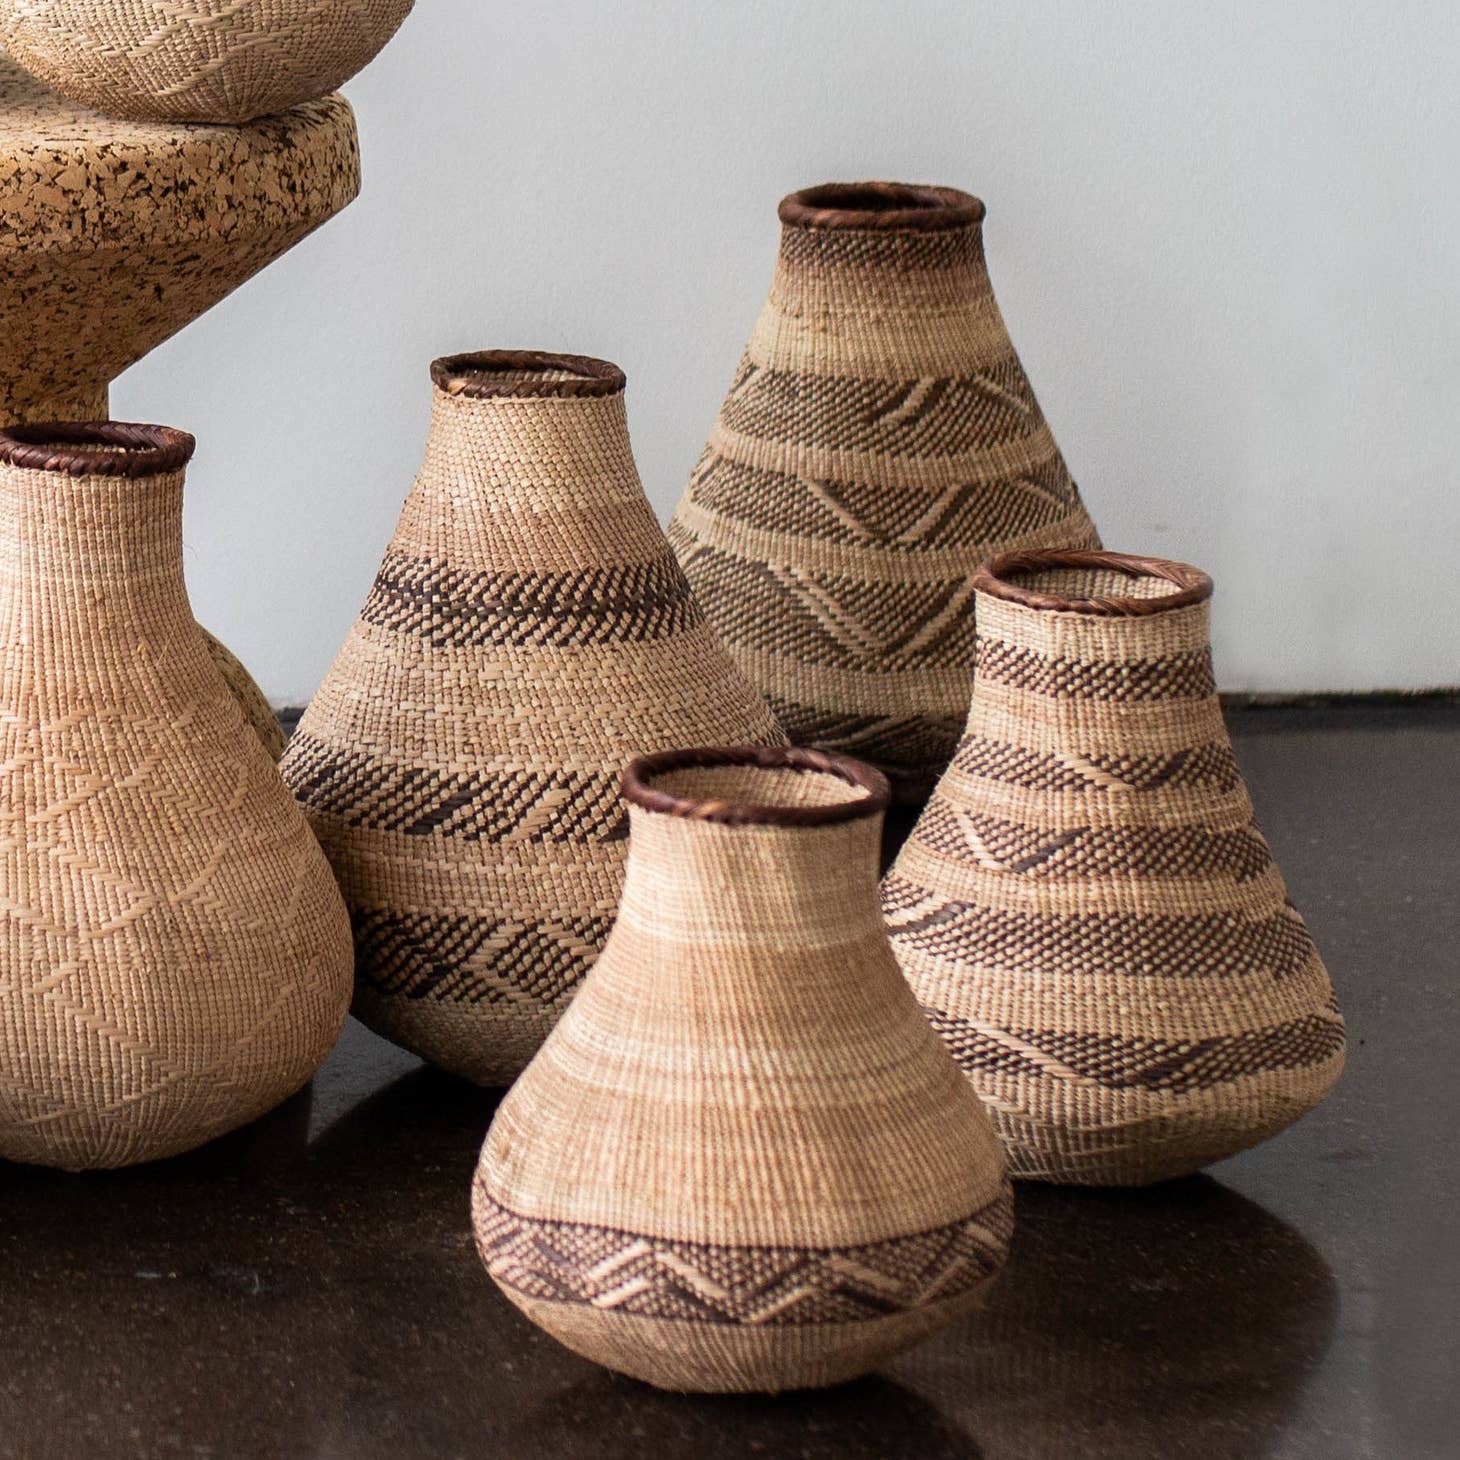 Handwoven by artisans in Africa to resemble the gourds traditionally used for grain storage or water carrying, these baskets provide a delightfully natural  element, with varied abstract, geometric patterns created by weaving in darker fibers. 